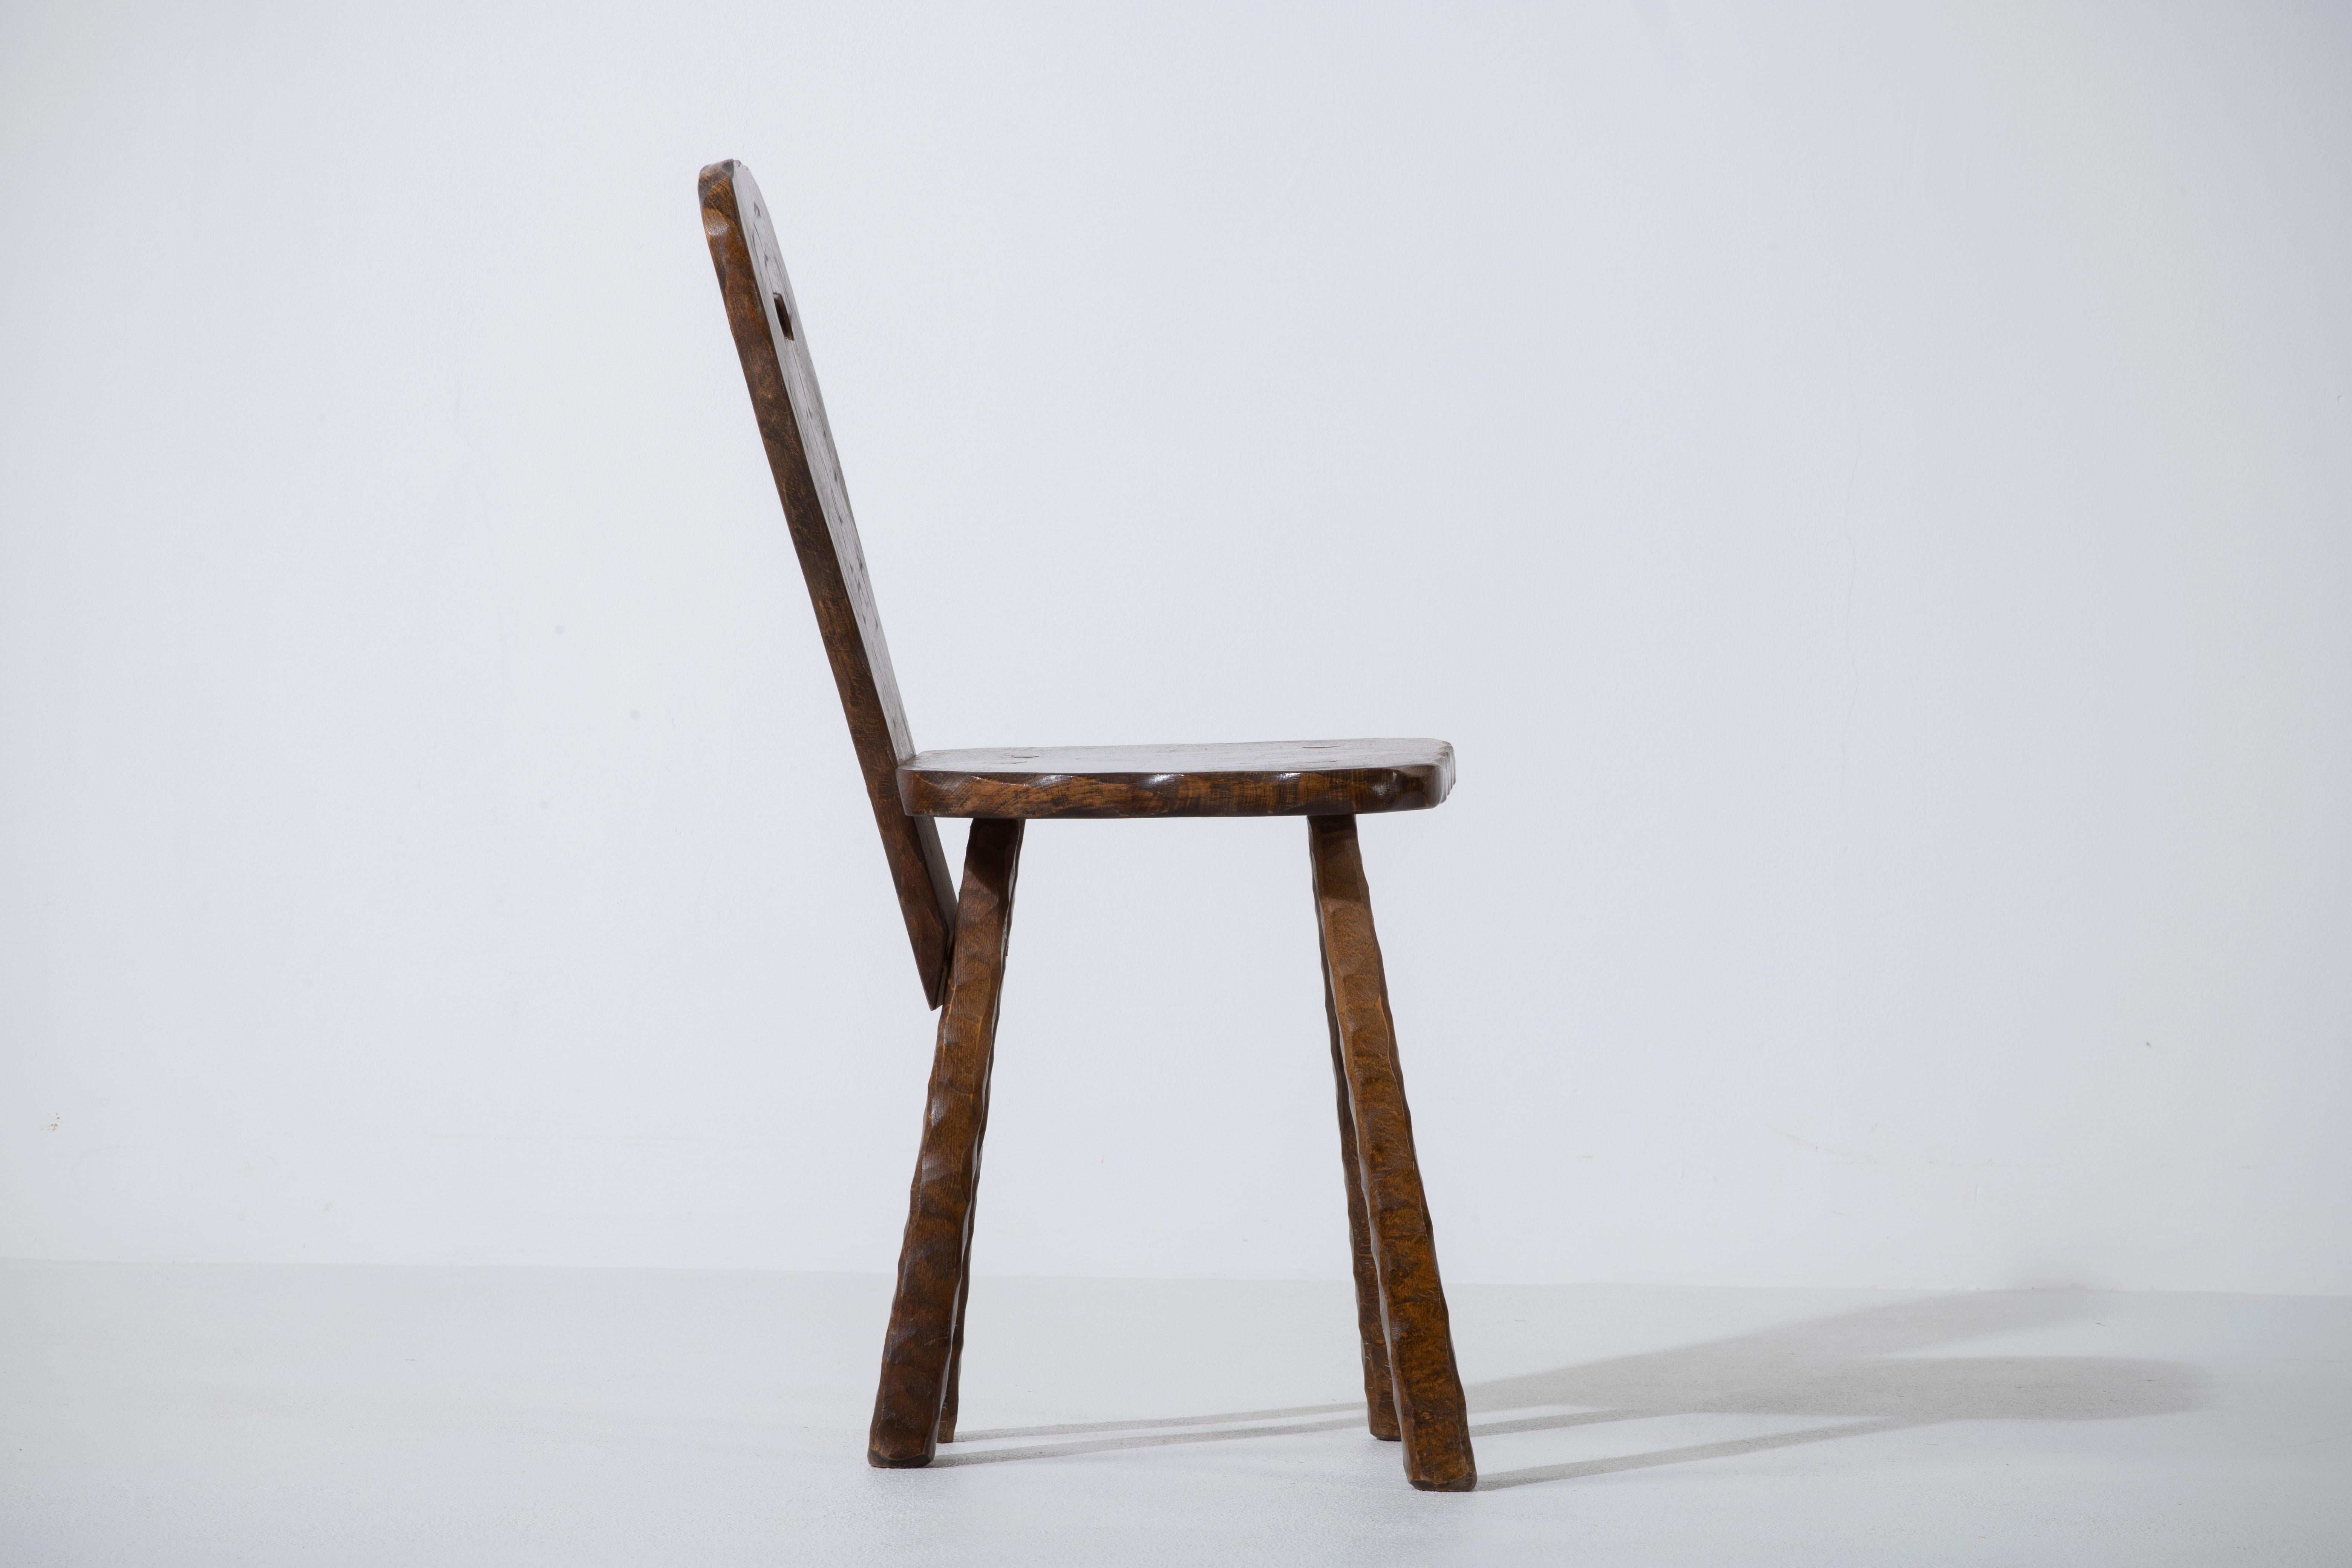 This French brutalist dining chair in solid oak was created in the 1940s.
Nice gouge details.